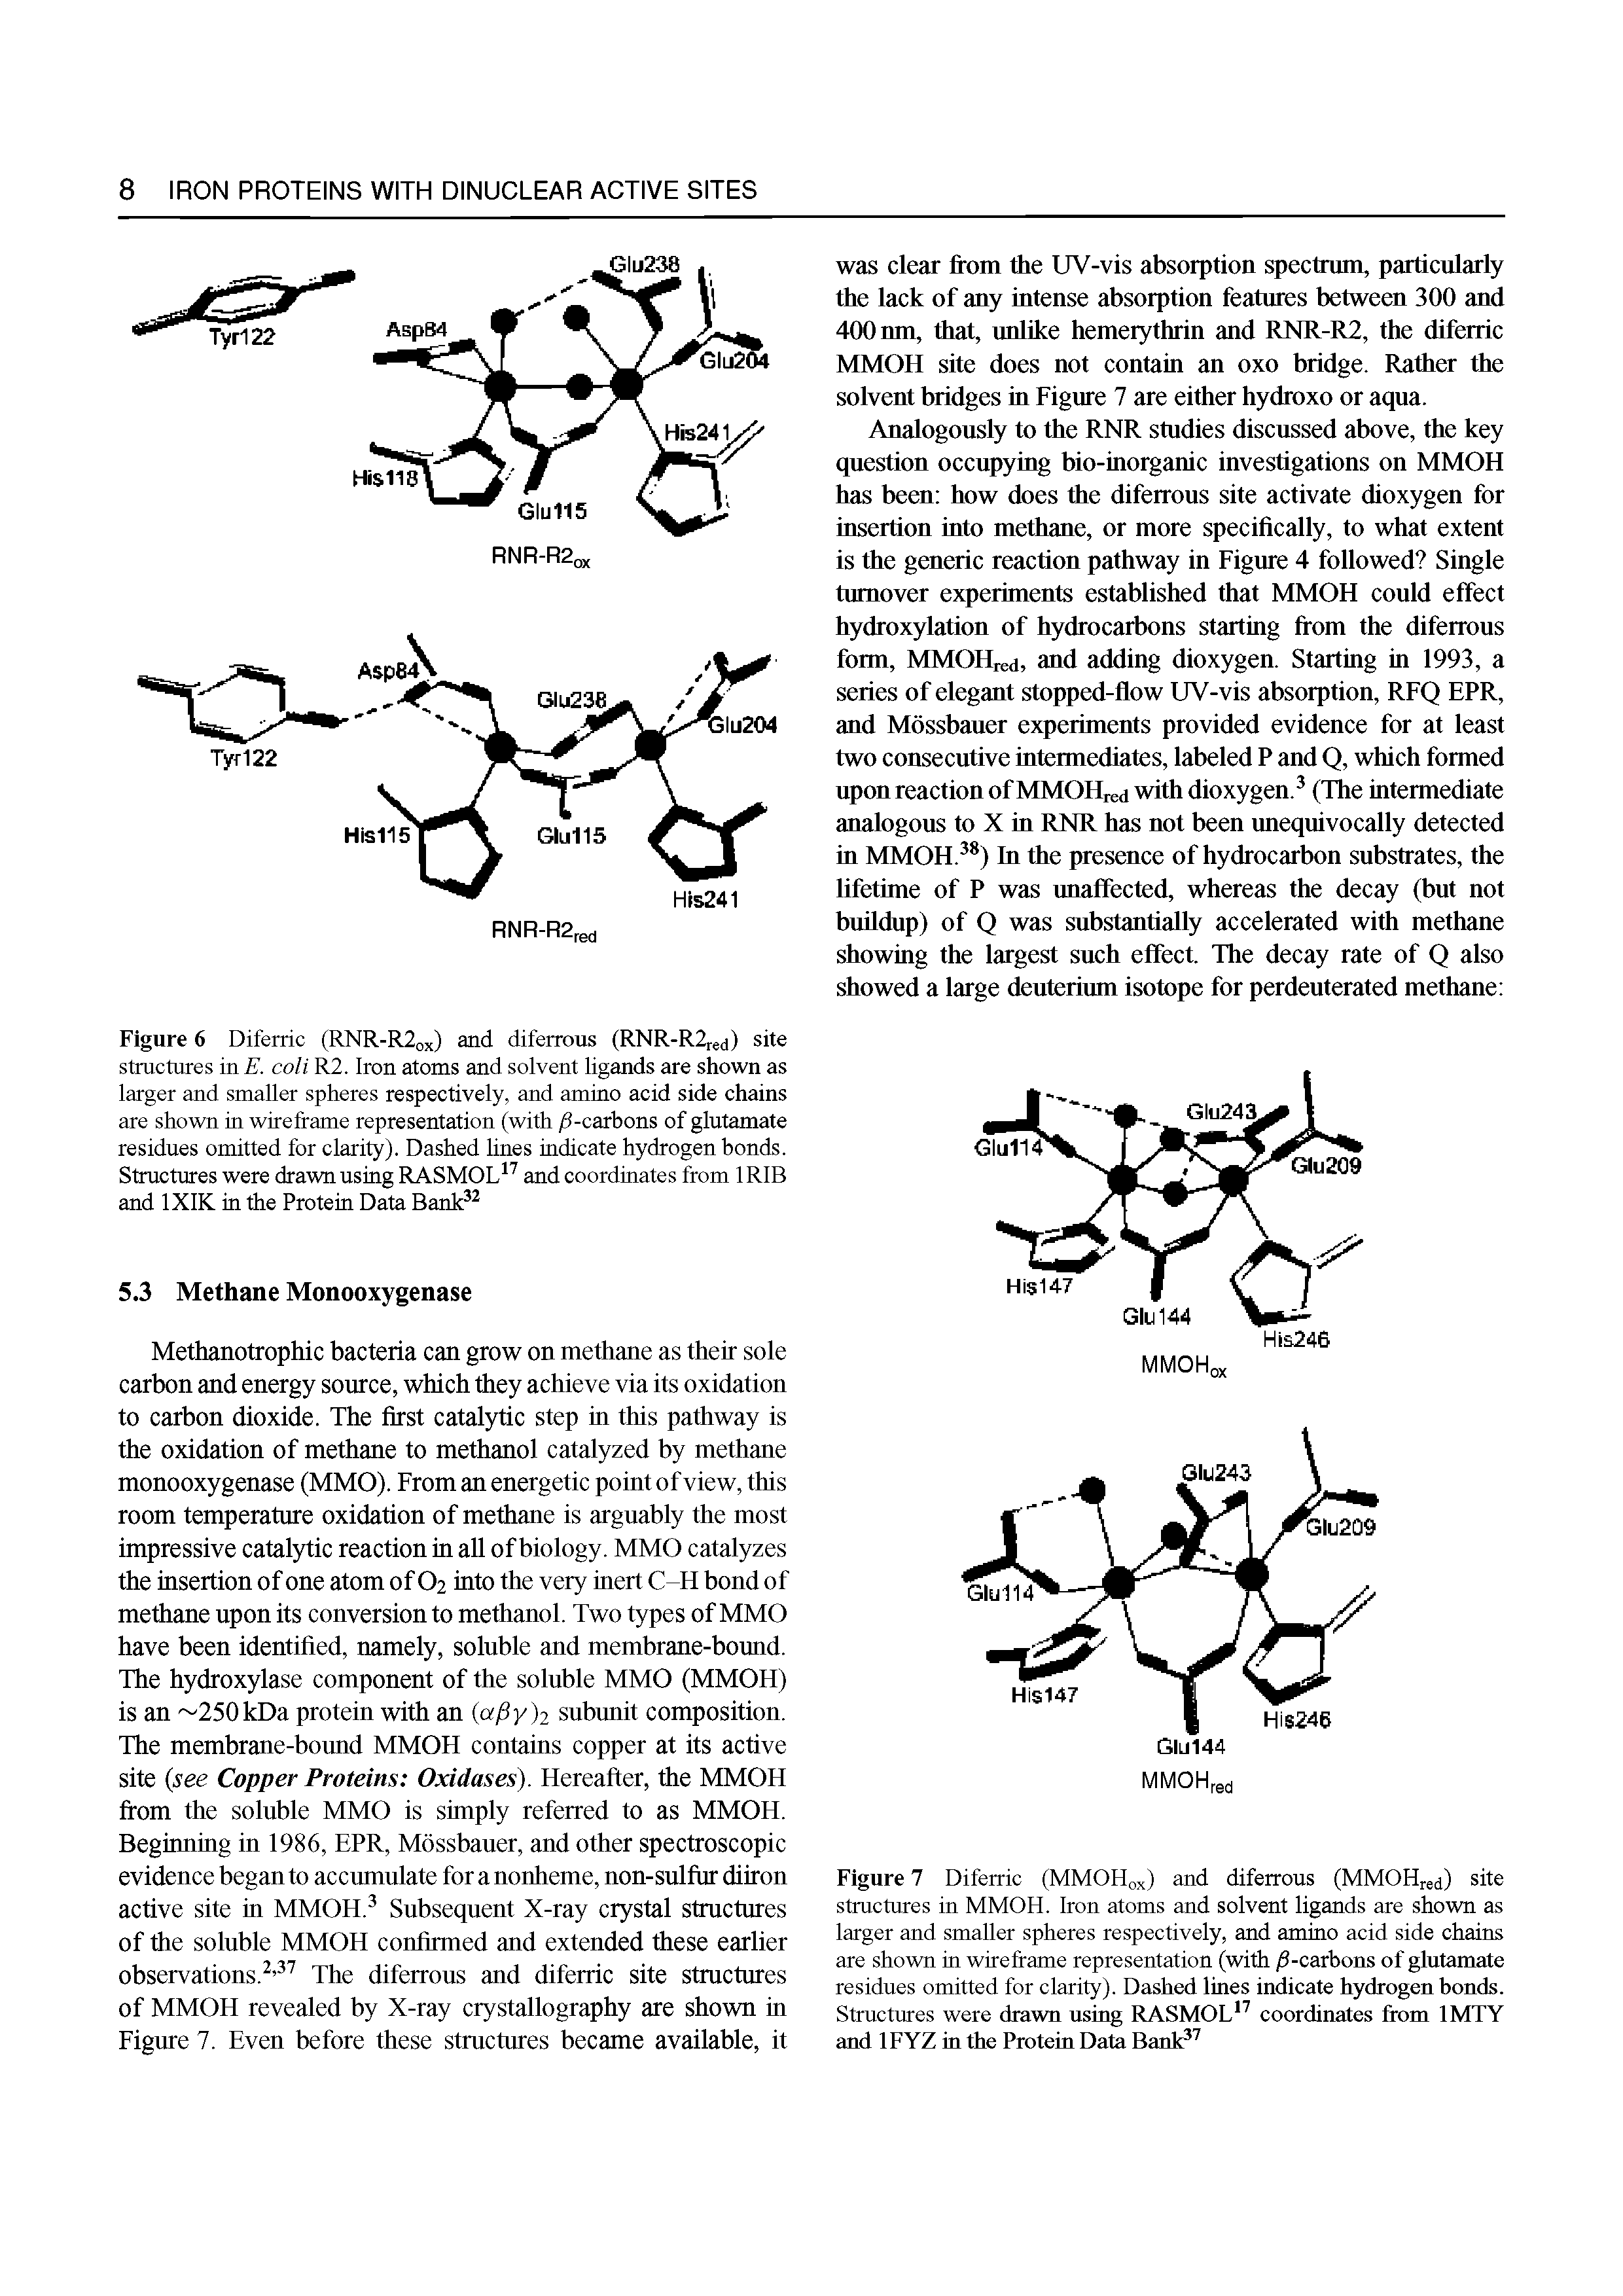 Figure 6 Diferric (RNR-R2 x) and diferrous (RNR-R2red) site structures in E. coli R2. Iron atoms and solvent ligands are shown as larger and smaller spheres respectively, and amino acid side chains are shown in wireframe representation (with /3-carbons of glutamate residues omitted for clarity). Dashed lines indicate hydrogen bonds. Structures were drawn using RASMOL and coordinates from 1 RIB and IXIK in the Protein Data Bank ...